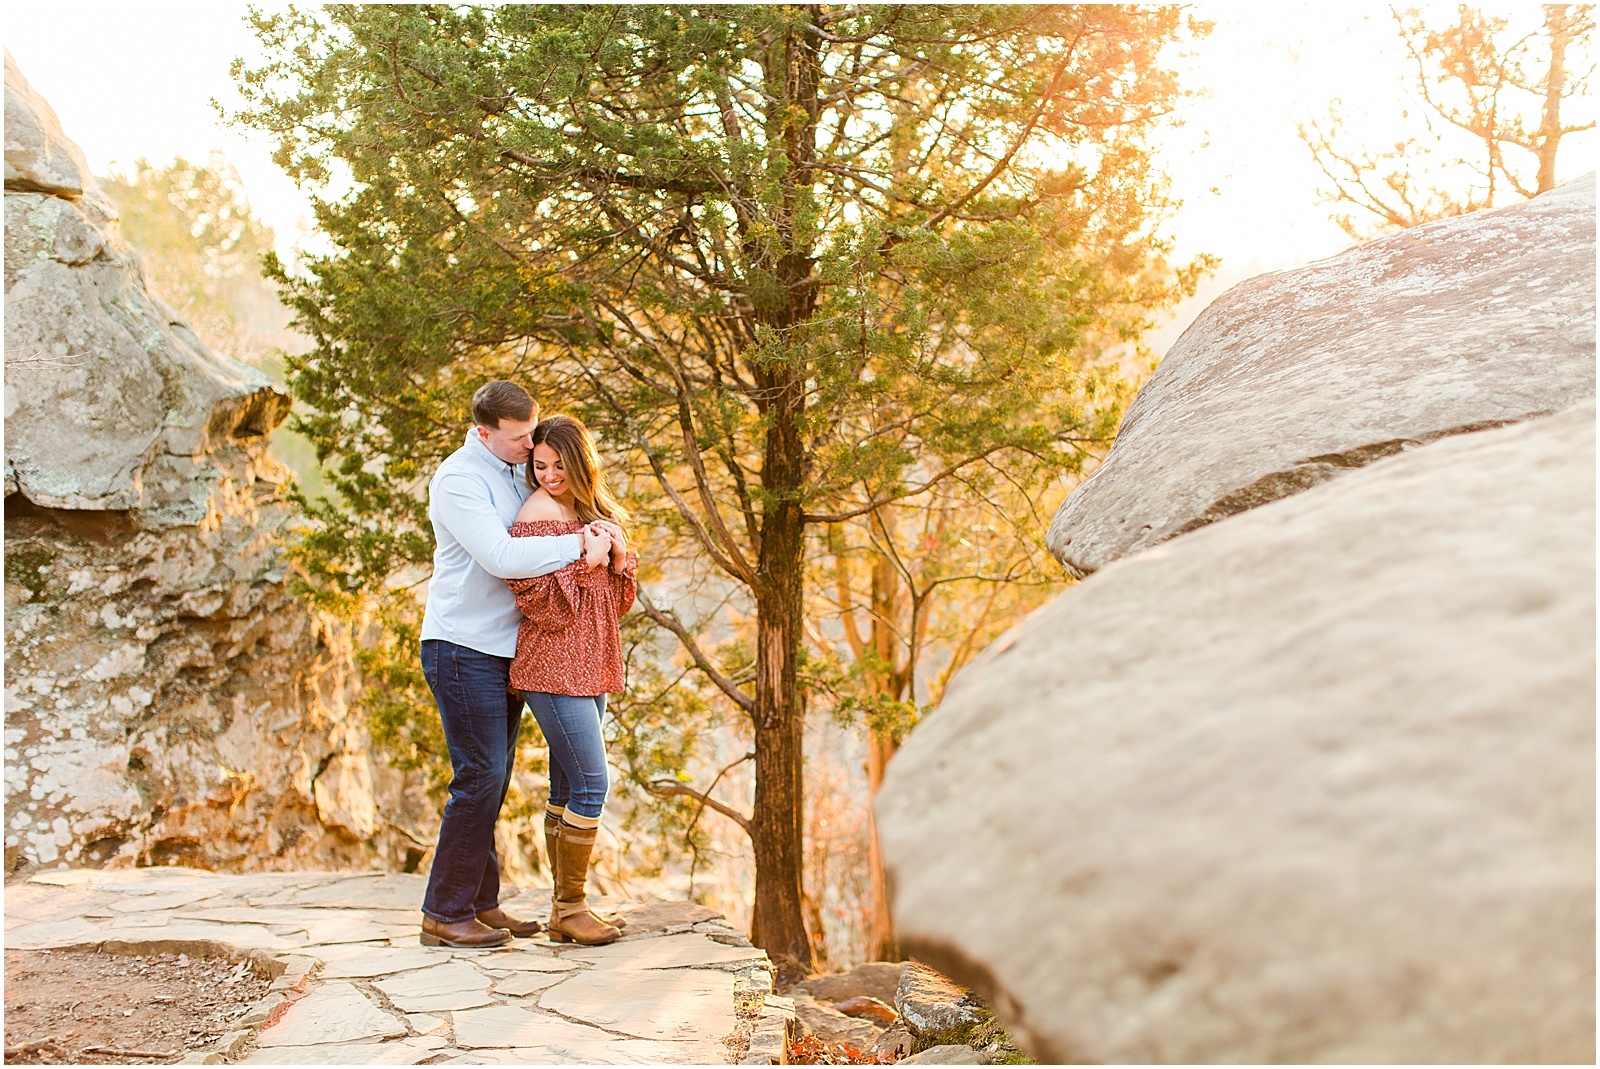 A Sunny Garden of the Gods Engagement Session | Shiloh and Lee | Bret and Brandie Photography074.jpg